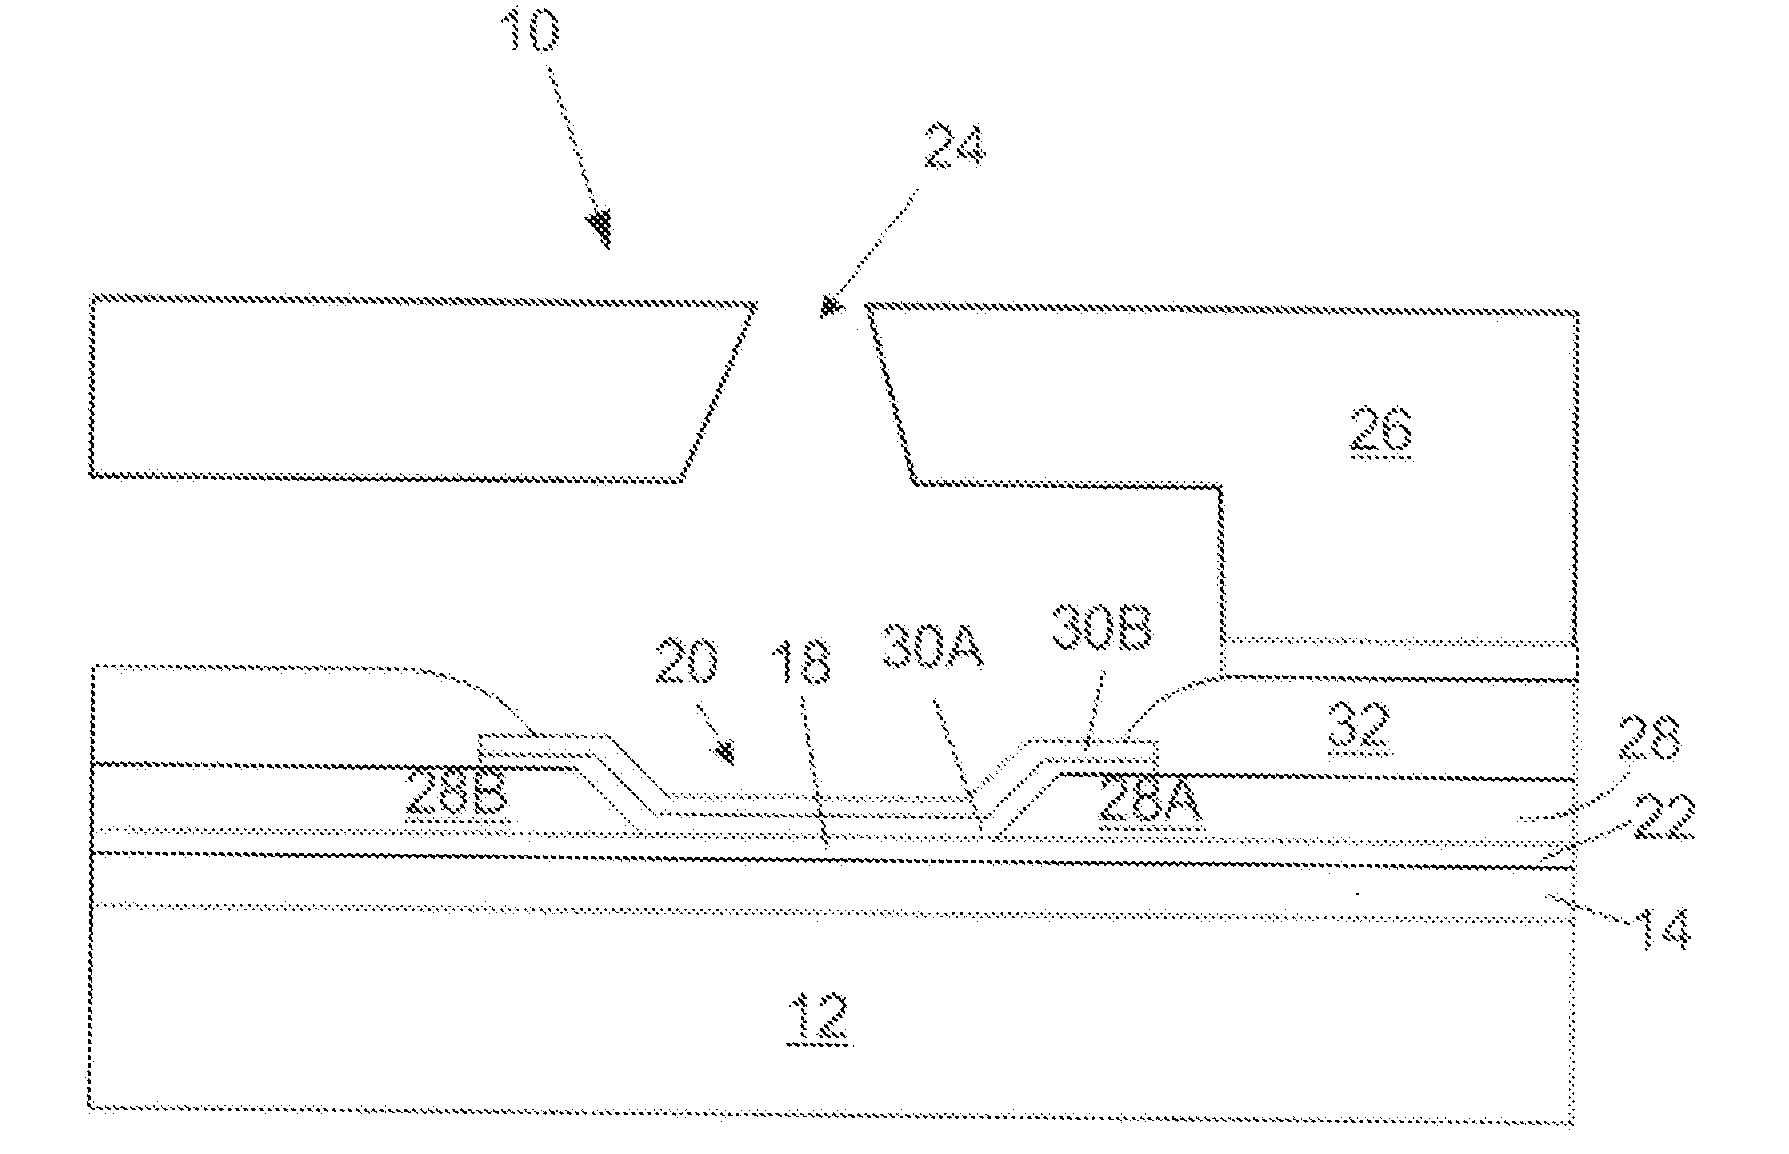 Composite Ceramic Substrate For Micro-Fluid Ejection Head